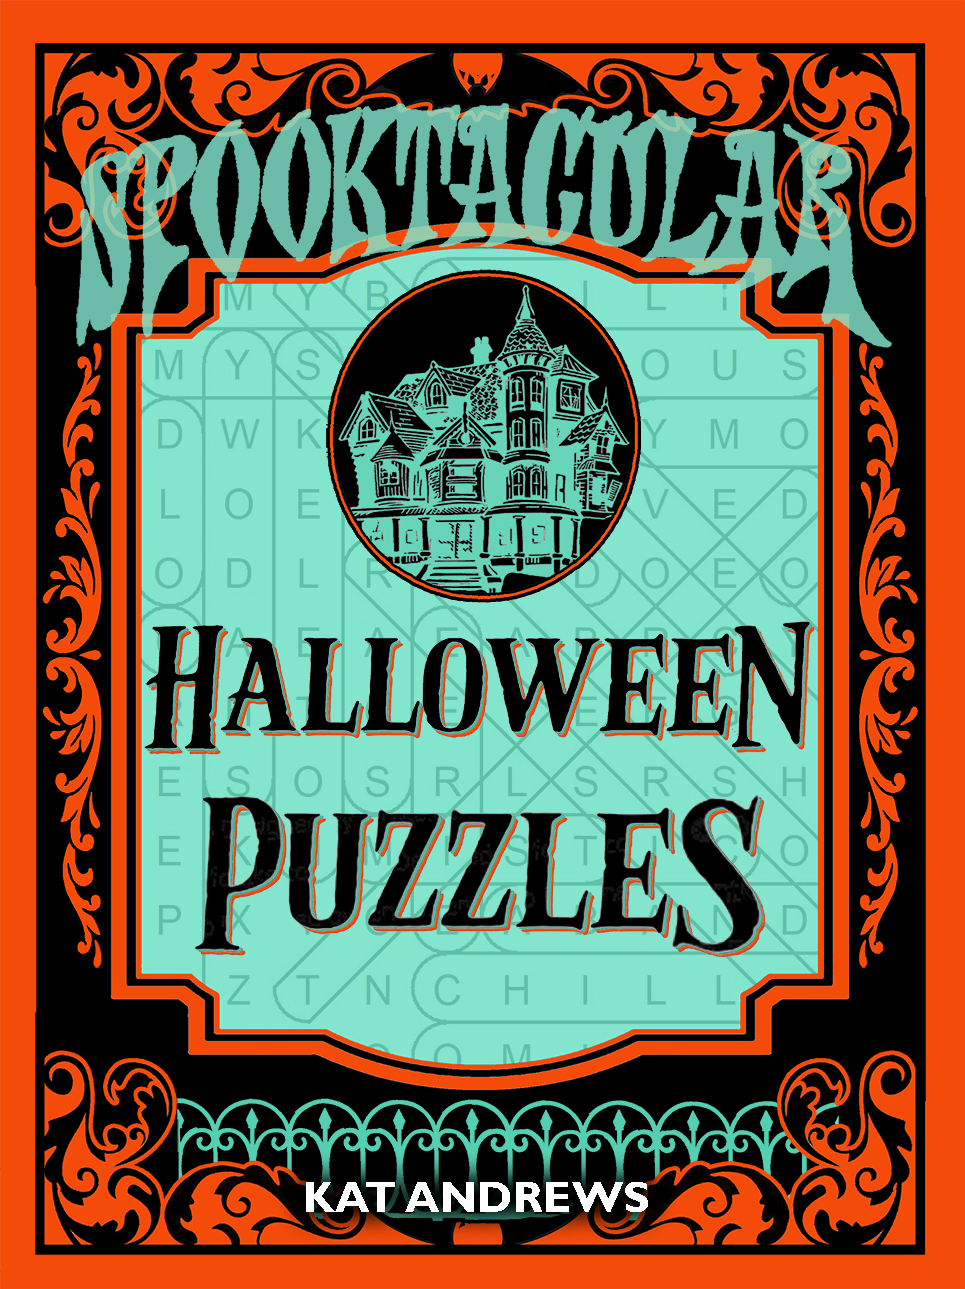 Halloween puzzle book for adults large print